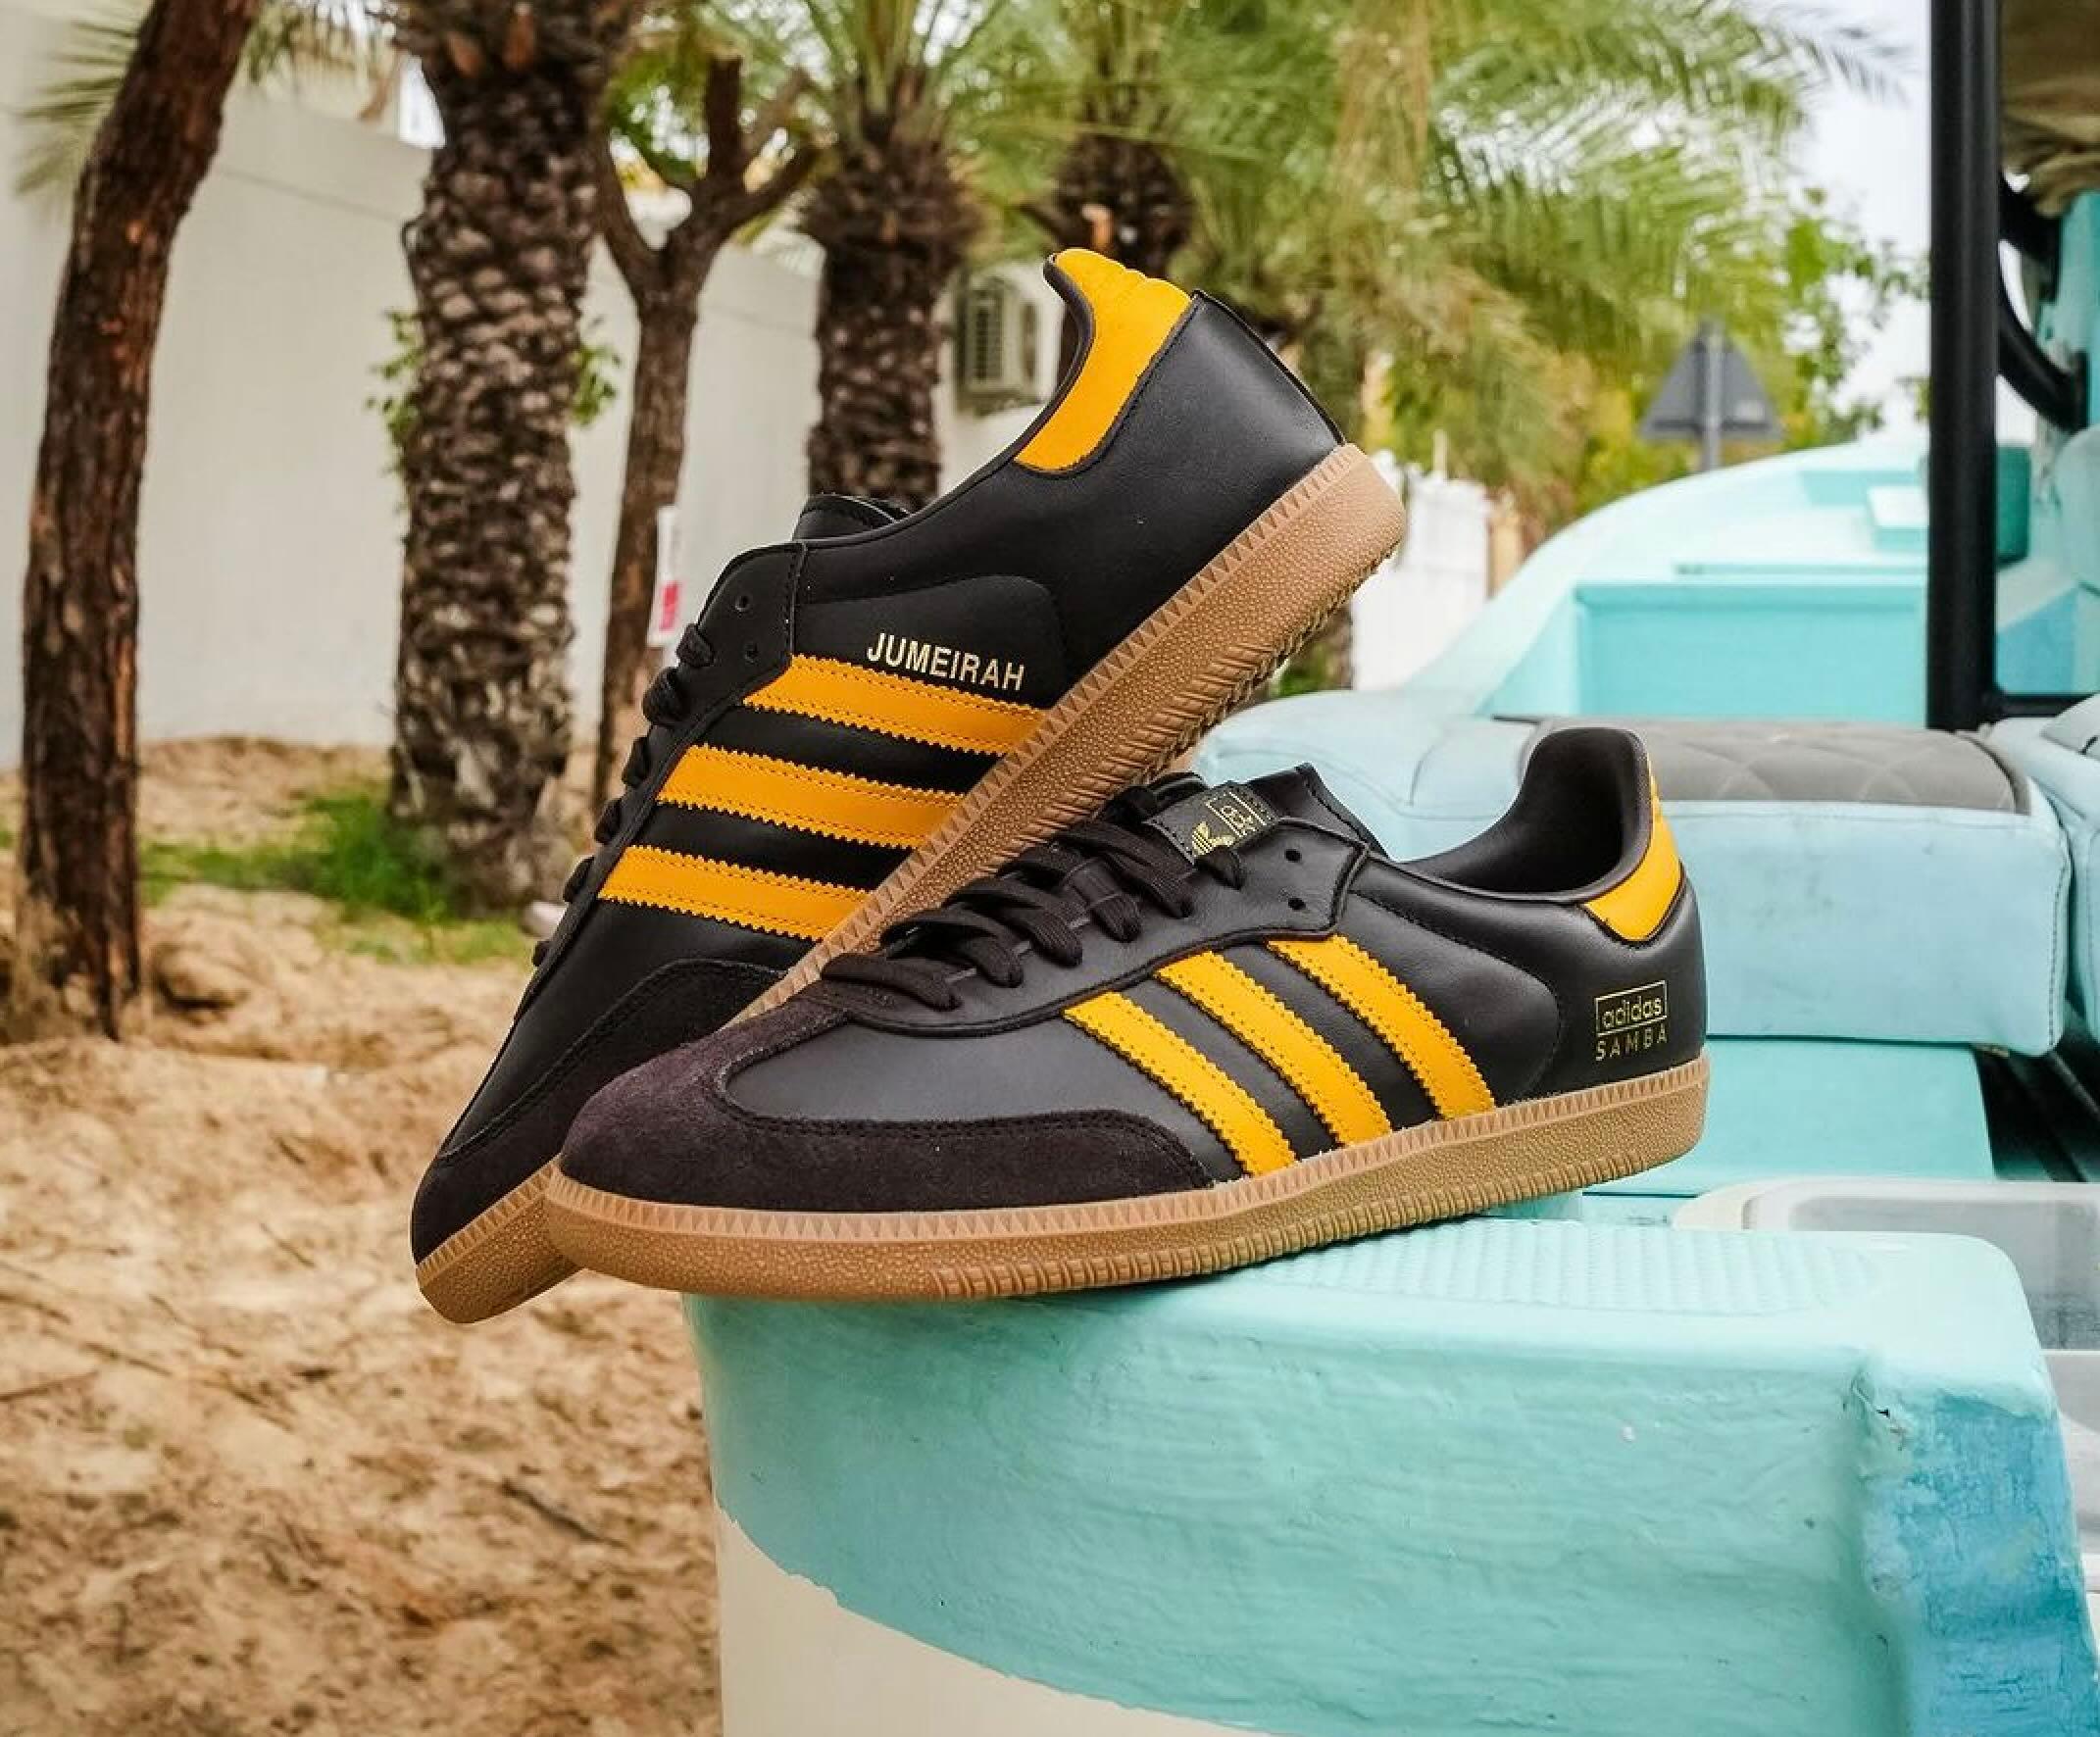 adidas creates a pair of Dubai sneakers – and here’s how to buy them 